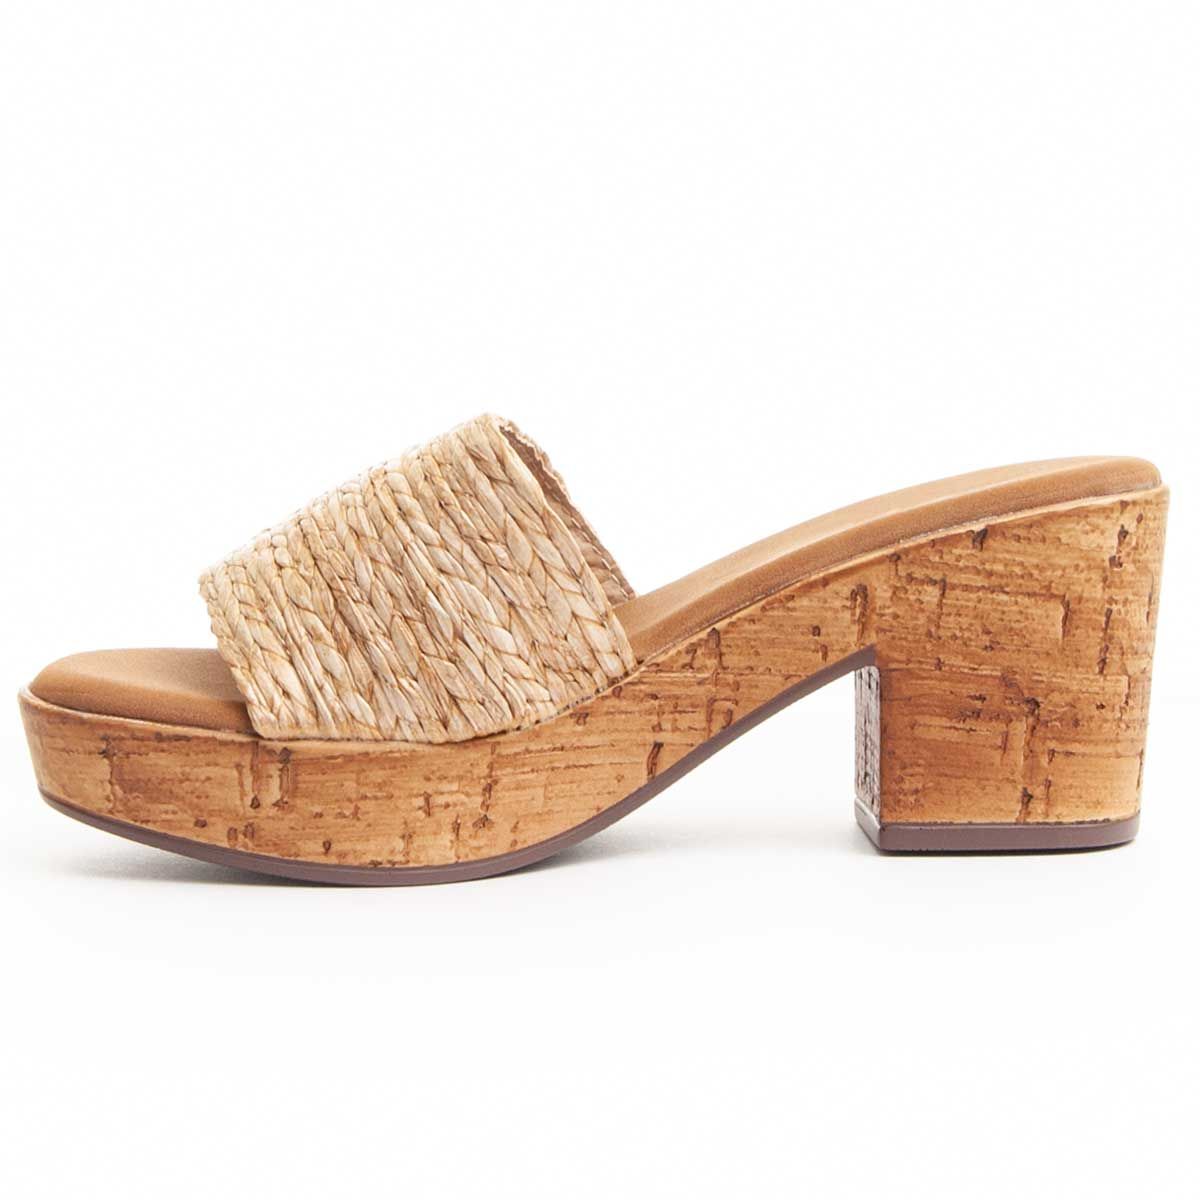 Sandal with comfortable platform and wide heel for women. Raffia lined that gives you a unique style. Quilted template that cushions your tread. Anti-slip sole and very light. The perfect sandal to go comfortable without losing style. Approximate measures: 8 cm Heel and 4 cm platform. Approximate measurement in centimeters of the inner plant: 35 / 23.4; 36/24; 37/24.6; 38/25; 39/25.6; 40/26,2; 41/26.8. Capsula by Festissimo collection.